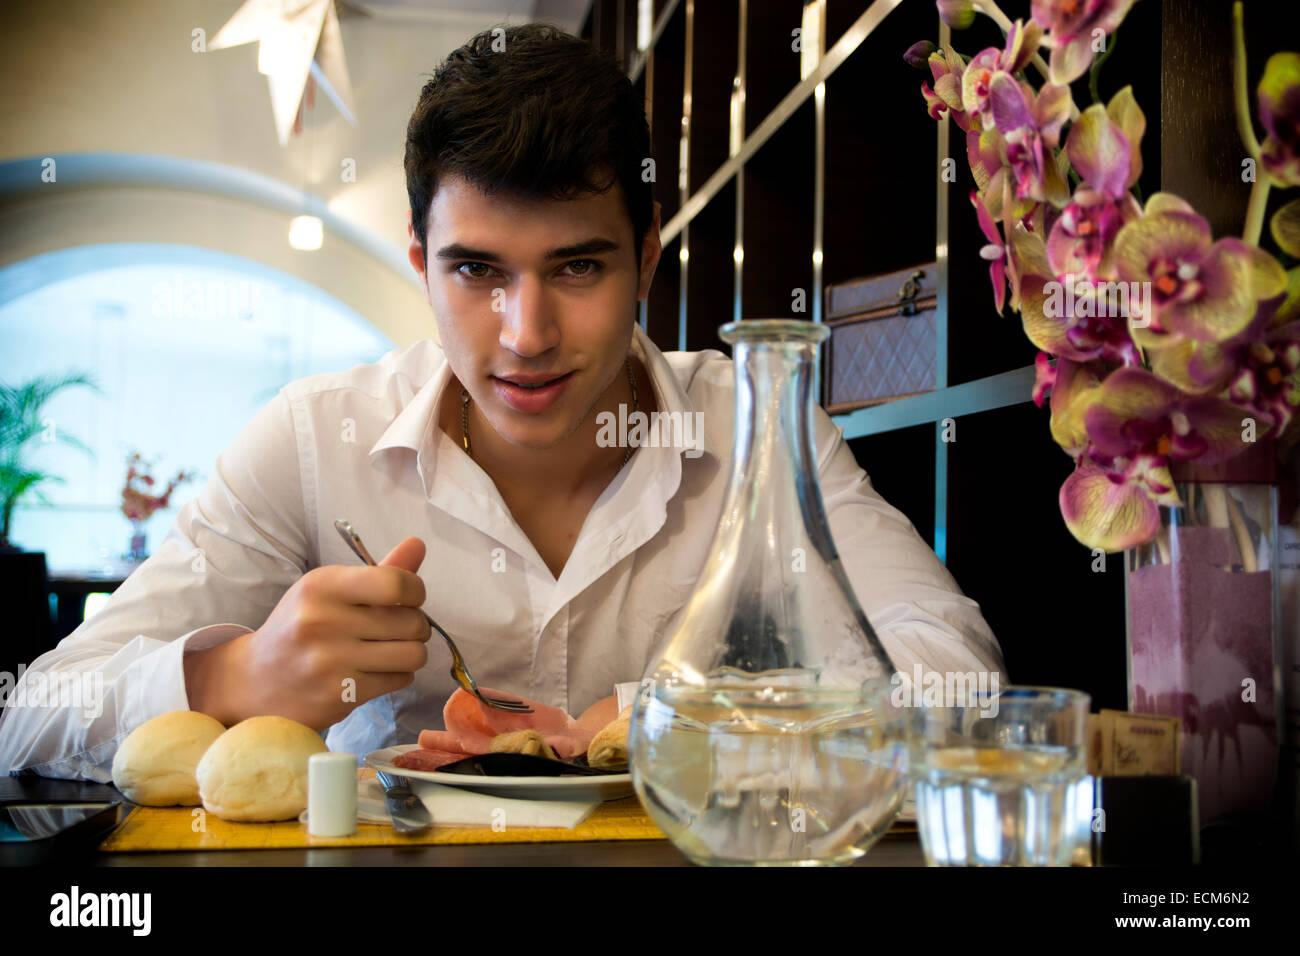 Handsome young man having lunch in elegant restaurant alone smiling and looking at camera Stock Photo